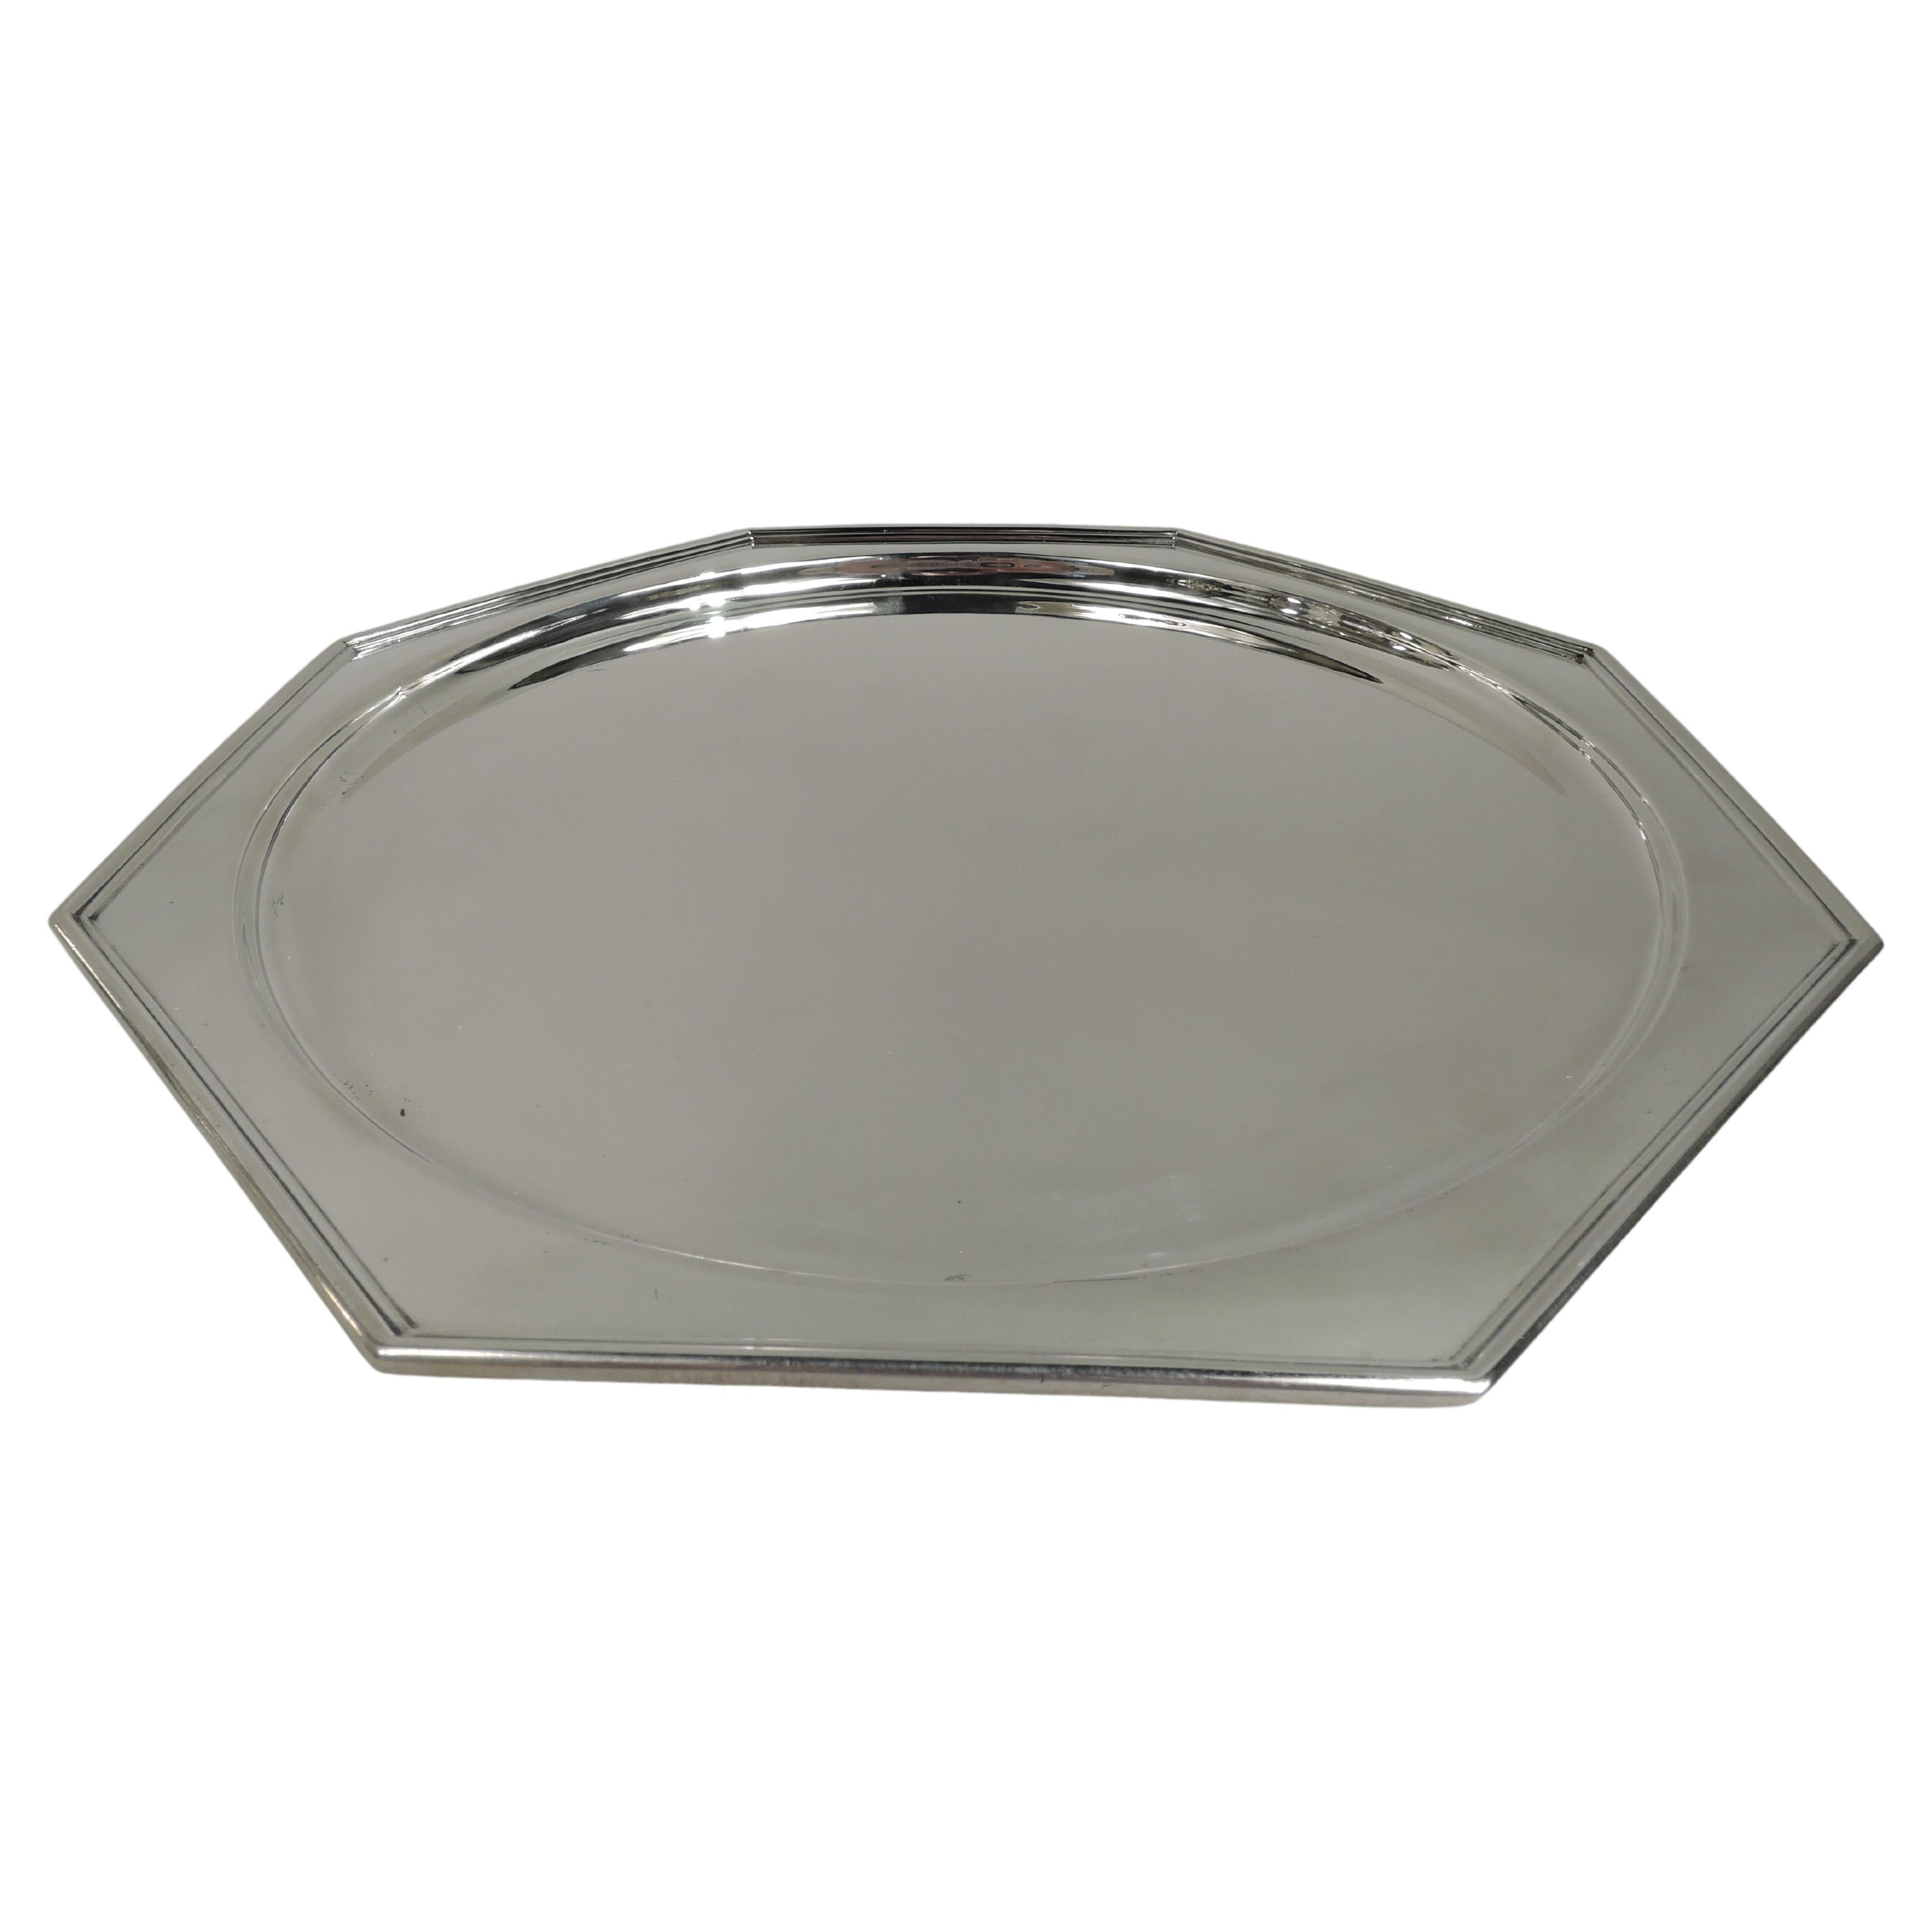 Antique American Art Deco Sterling Silver Tray